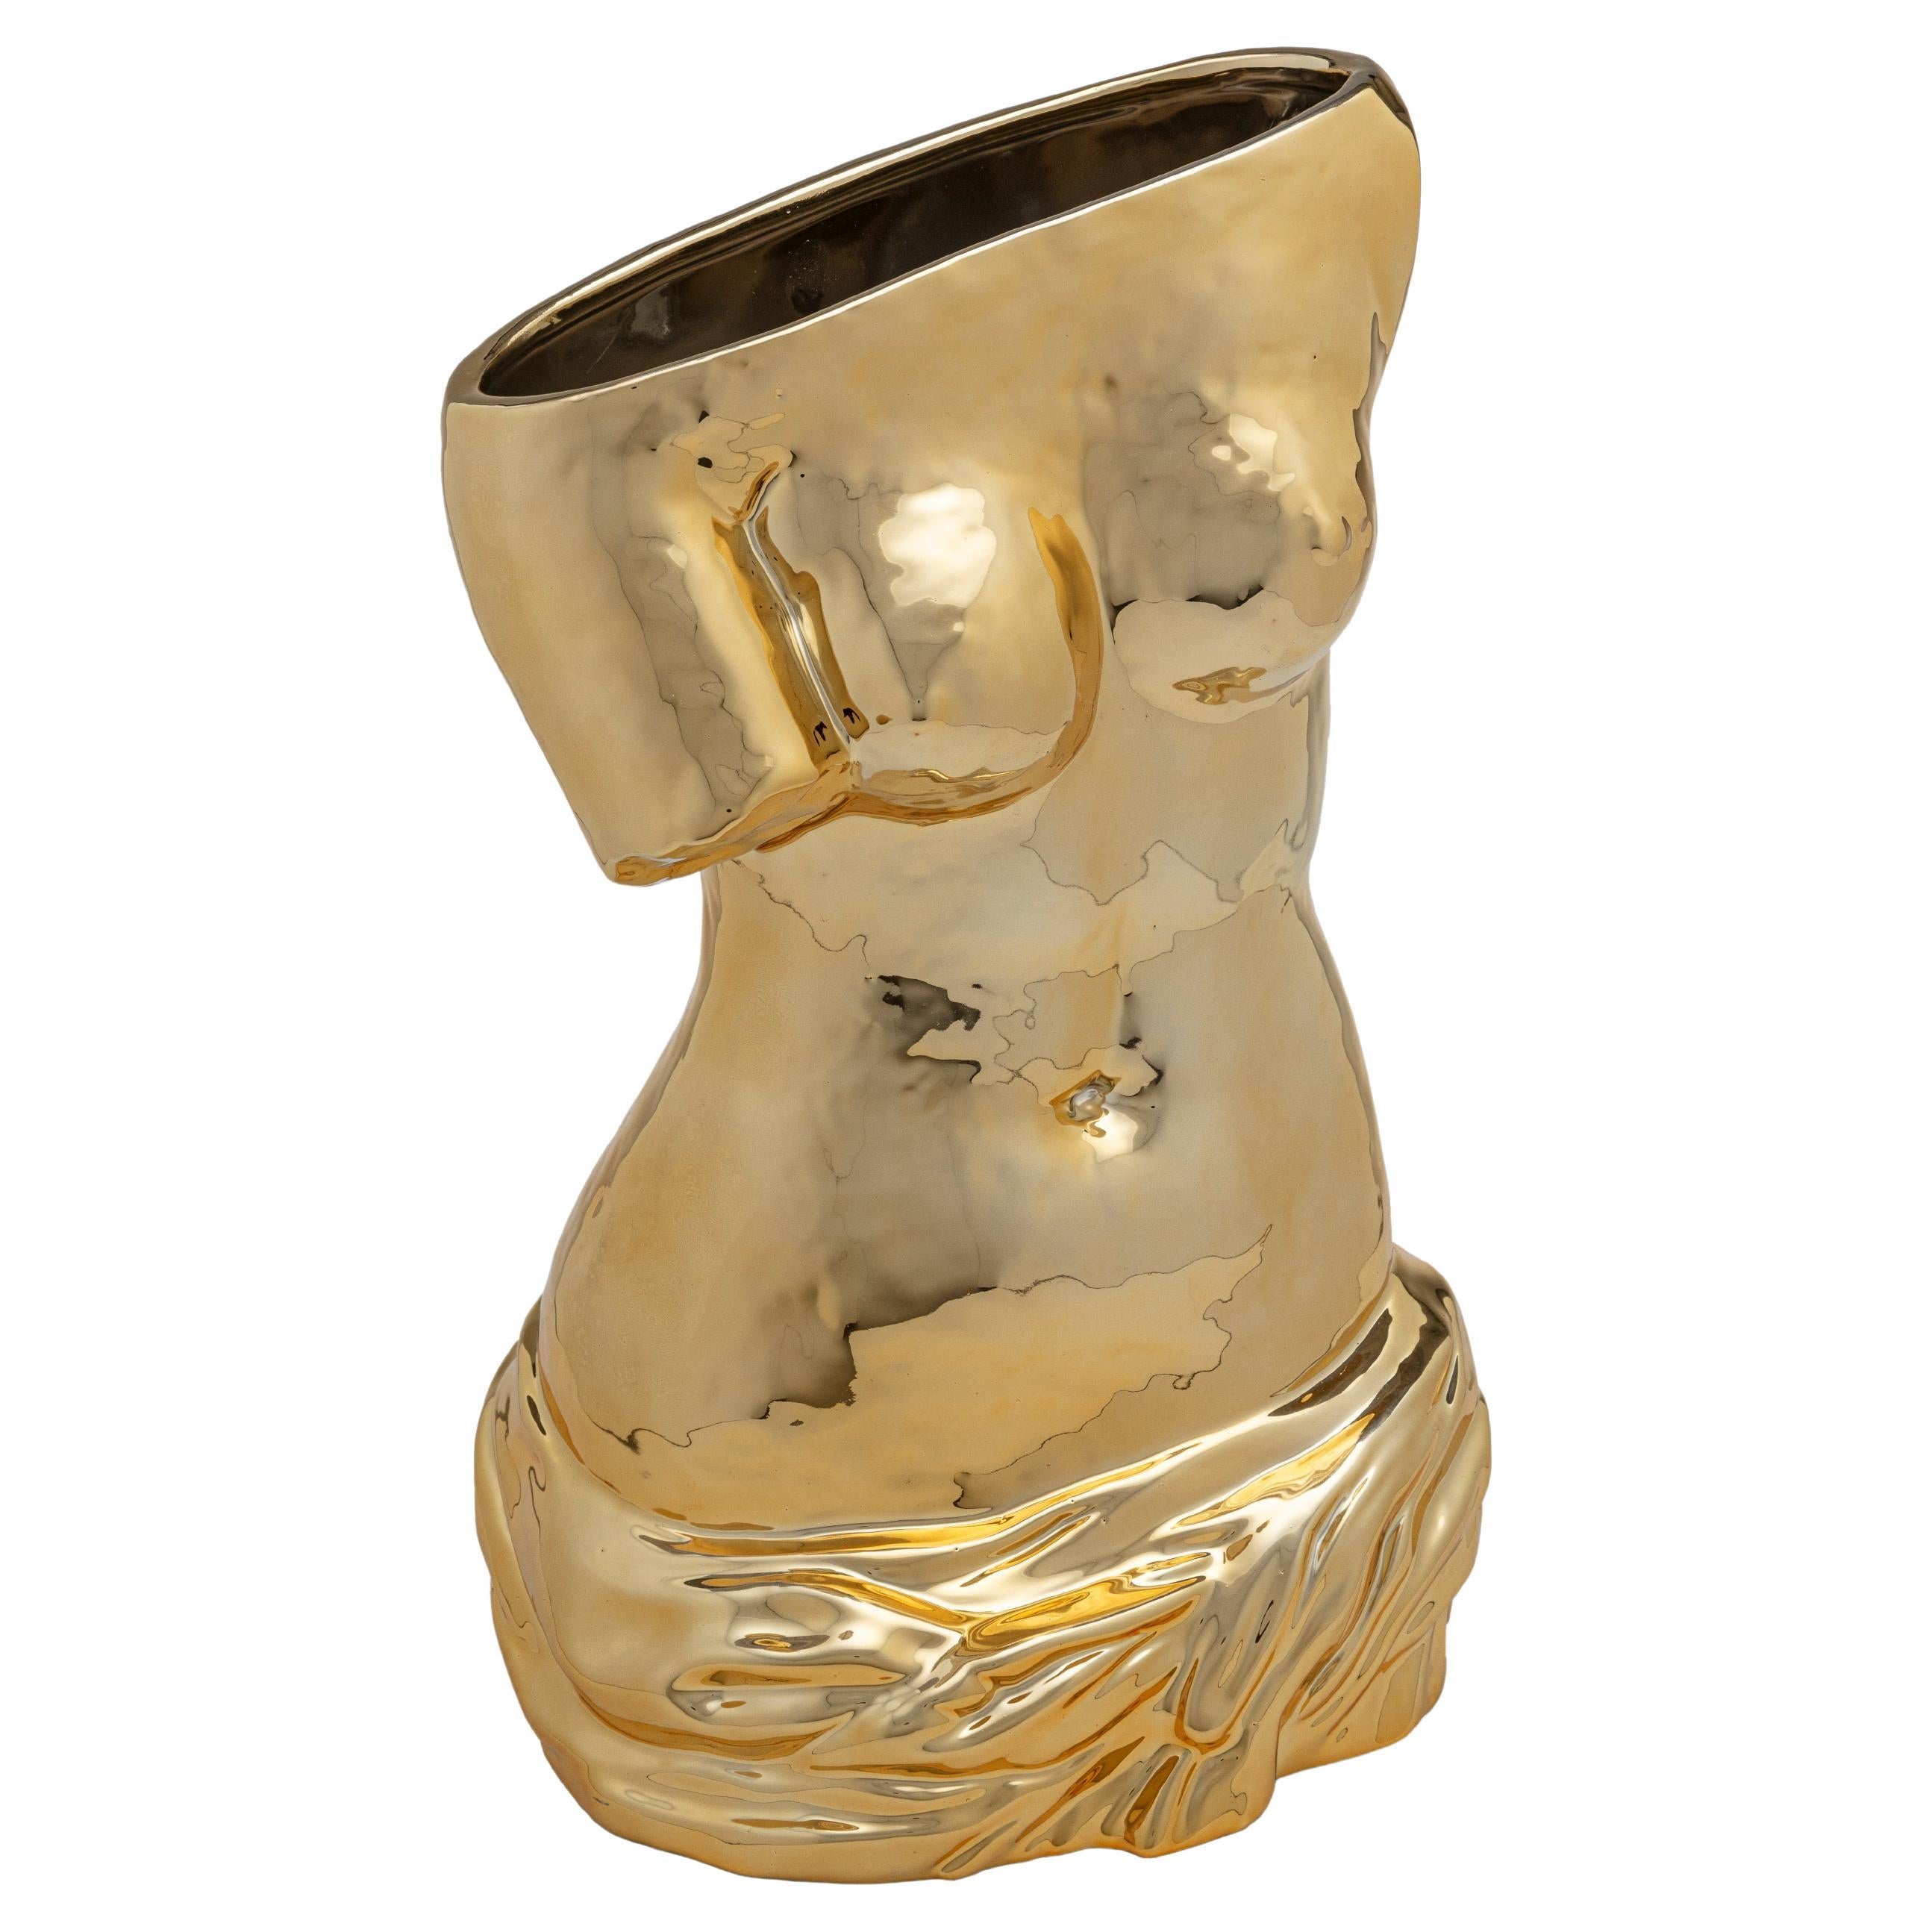 The statuary beauty of Milo’s Venus is reinterpreted and enriched by the pop soul of Blow. The half-bust of the Goddess plunges into gold and becomes the perfect vase for any occasion.